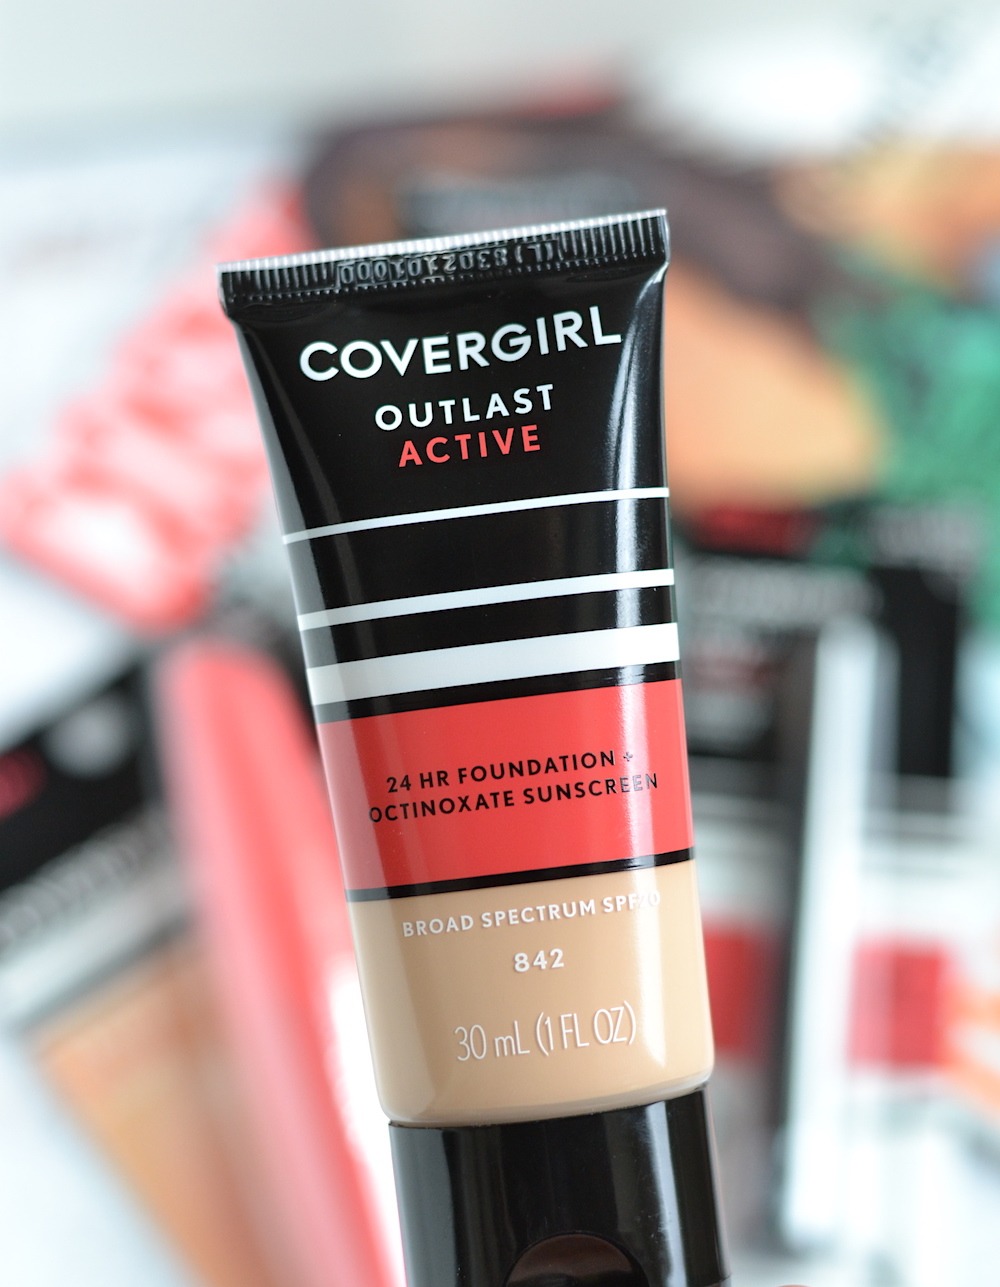 Covergirl Outlast Active Foundation SPF 20